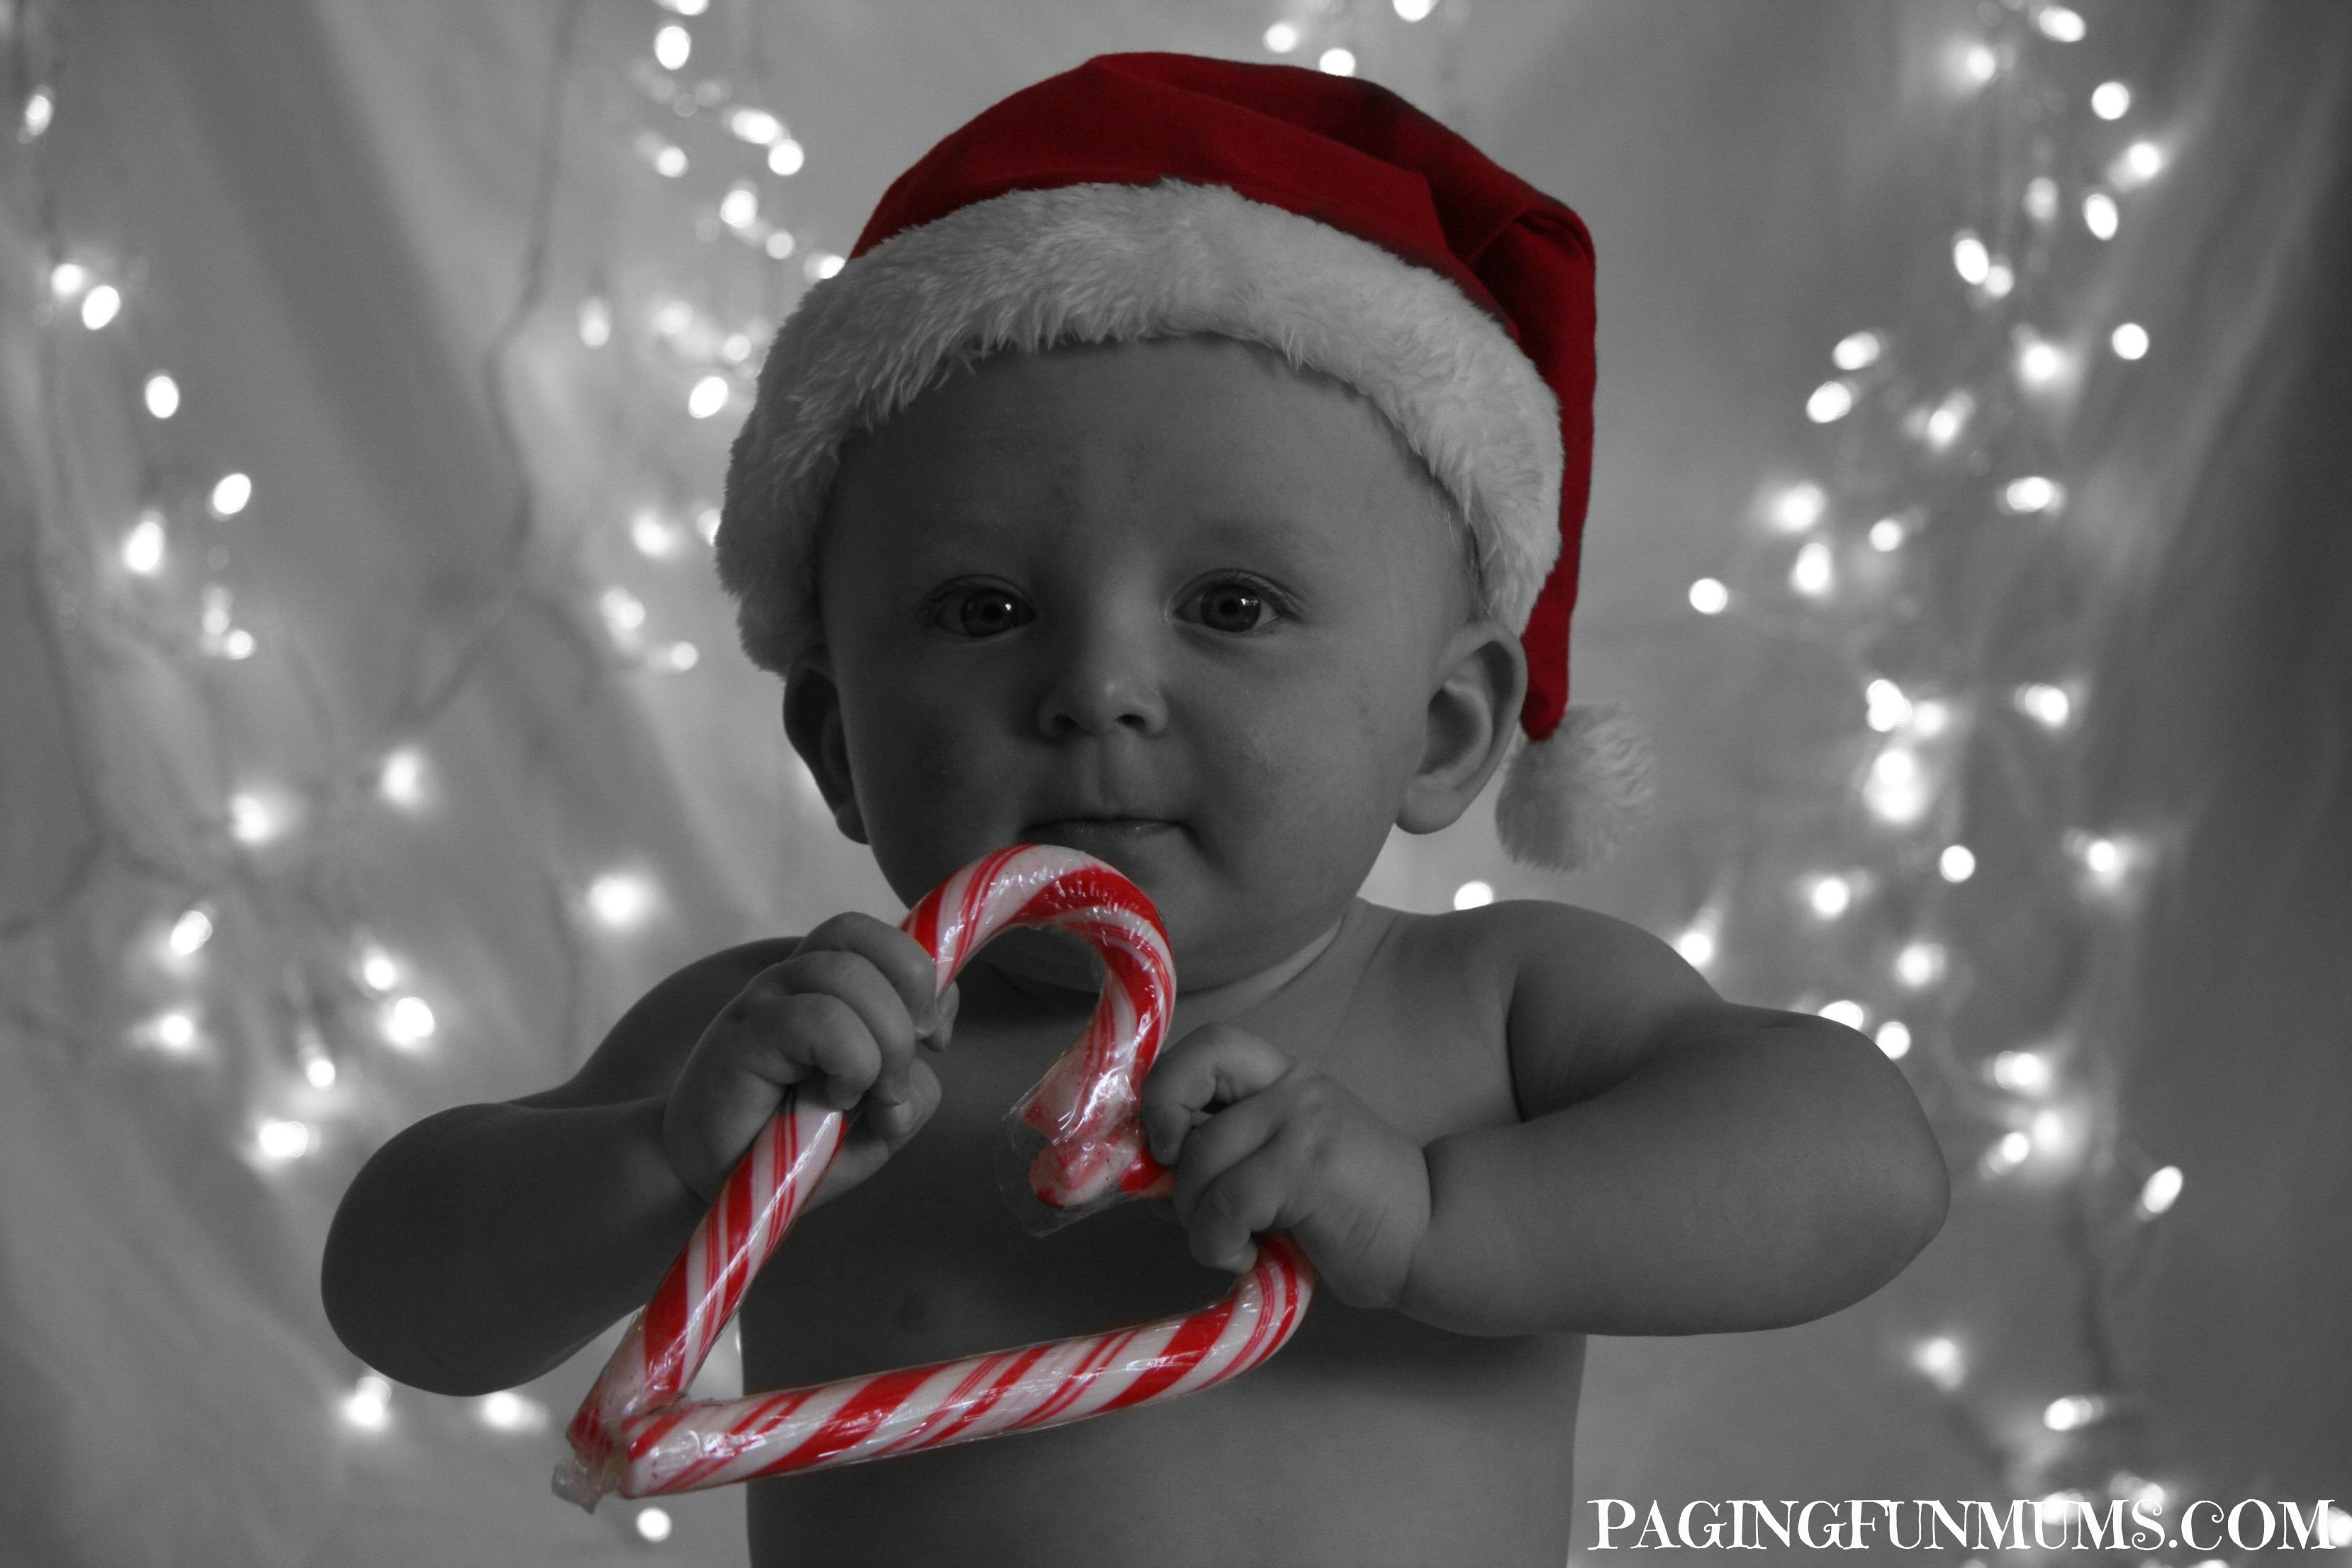 Fun Christmas Photos with Kids - Two Candy Canes make a great prop!